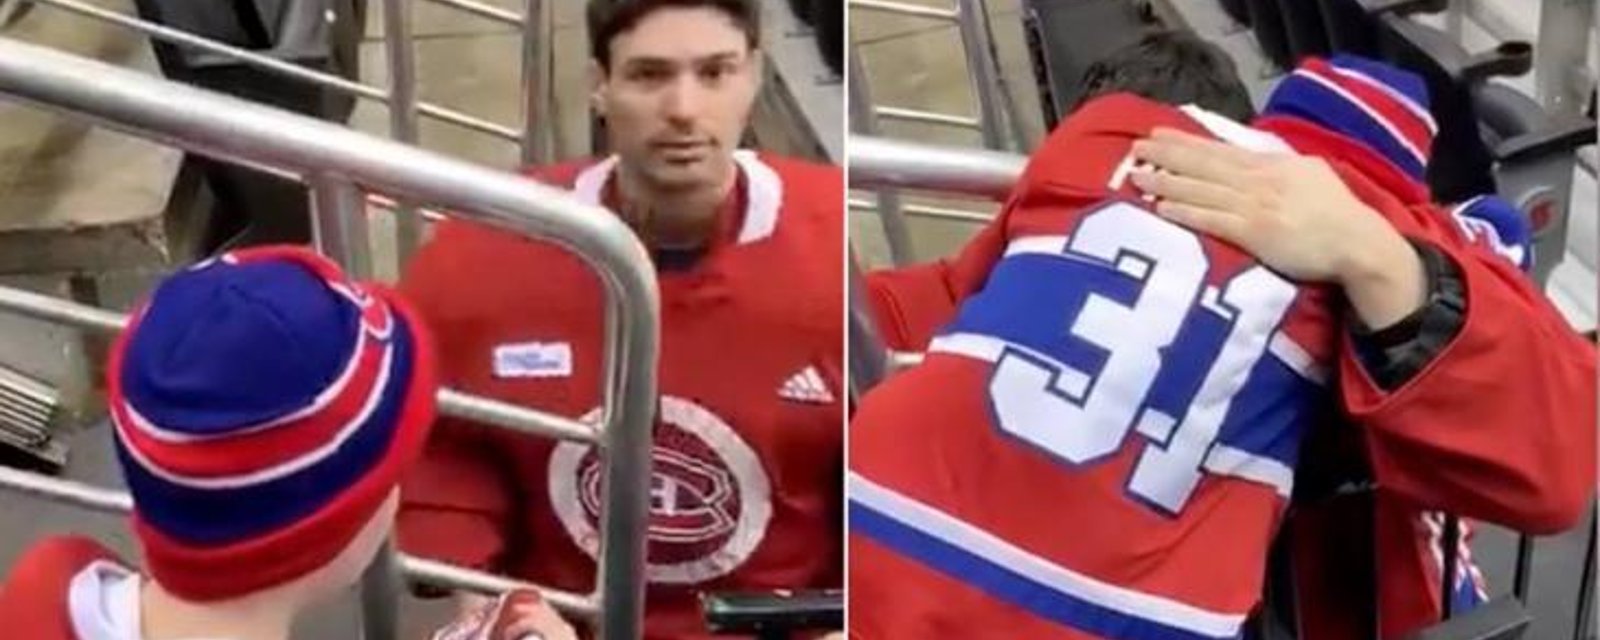 A heartwarming update on the young boy who lost his mother to cancer and met his hero Carey Price 